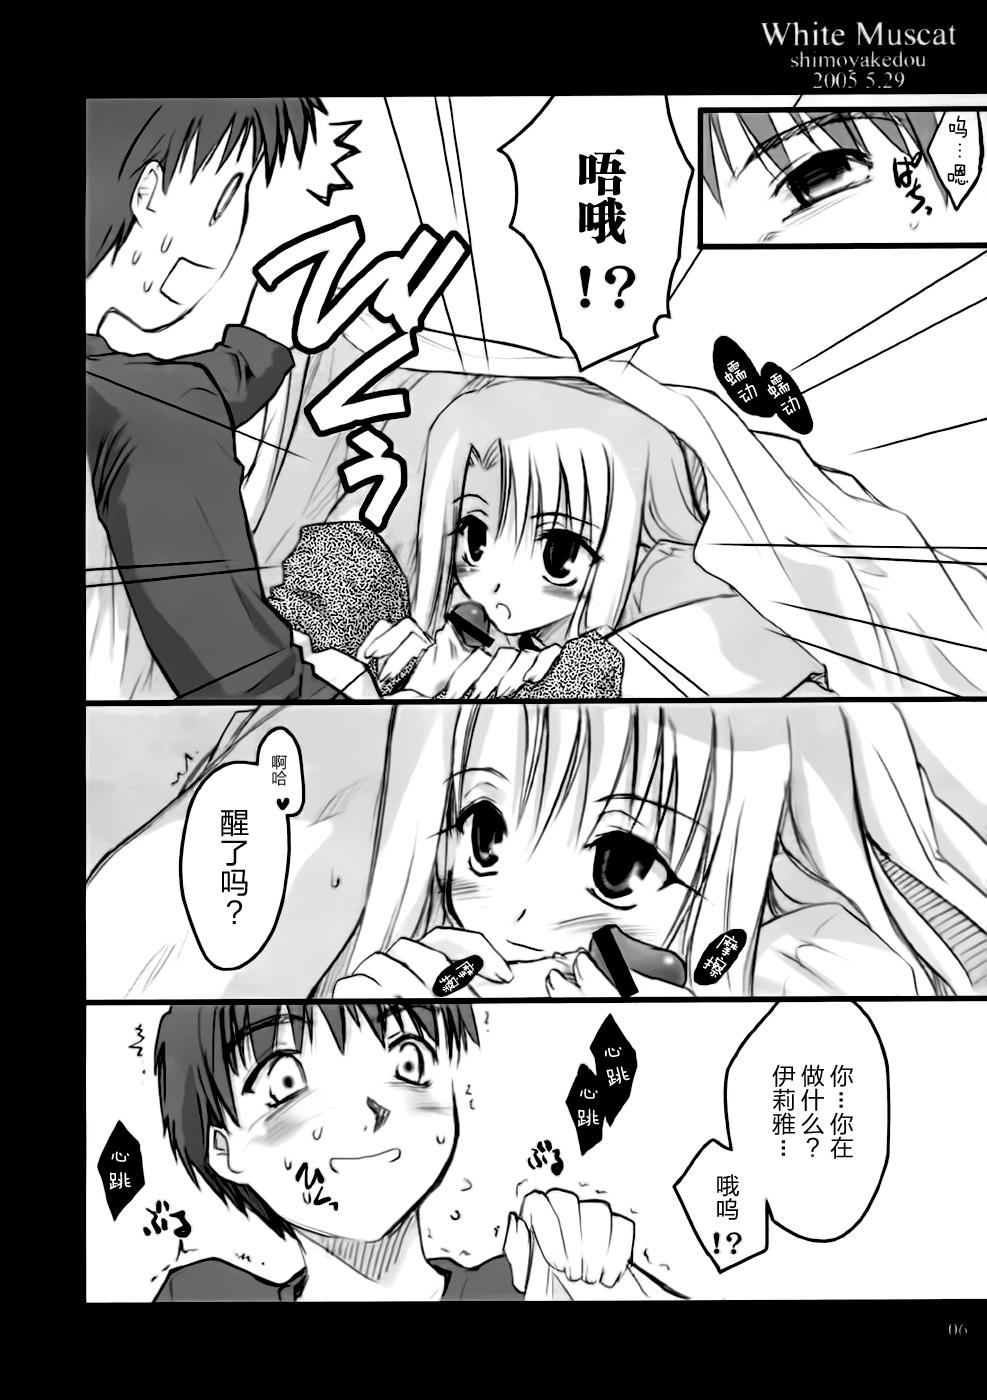 8teen White Muscat - Fate stay night Peituda - Page 6